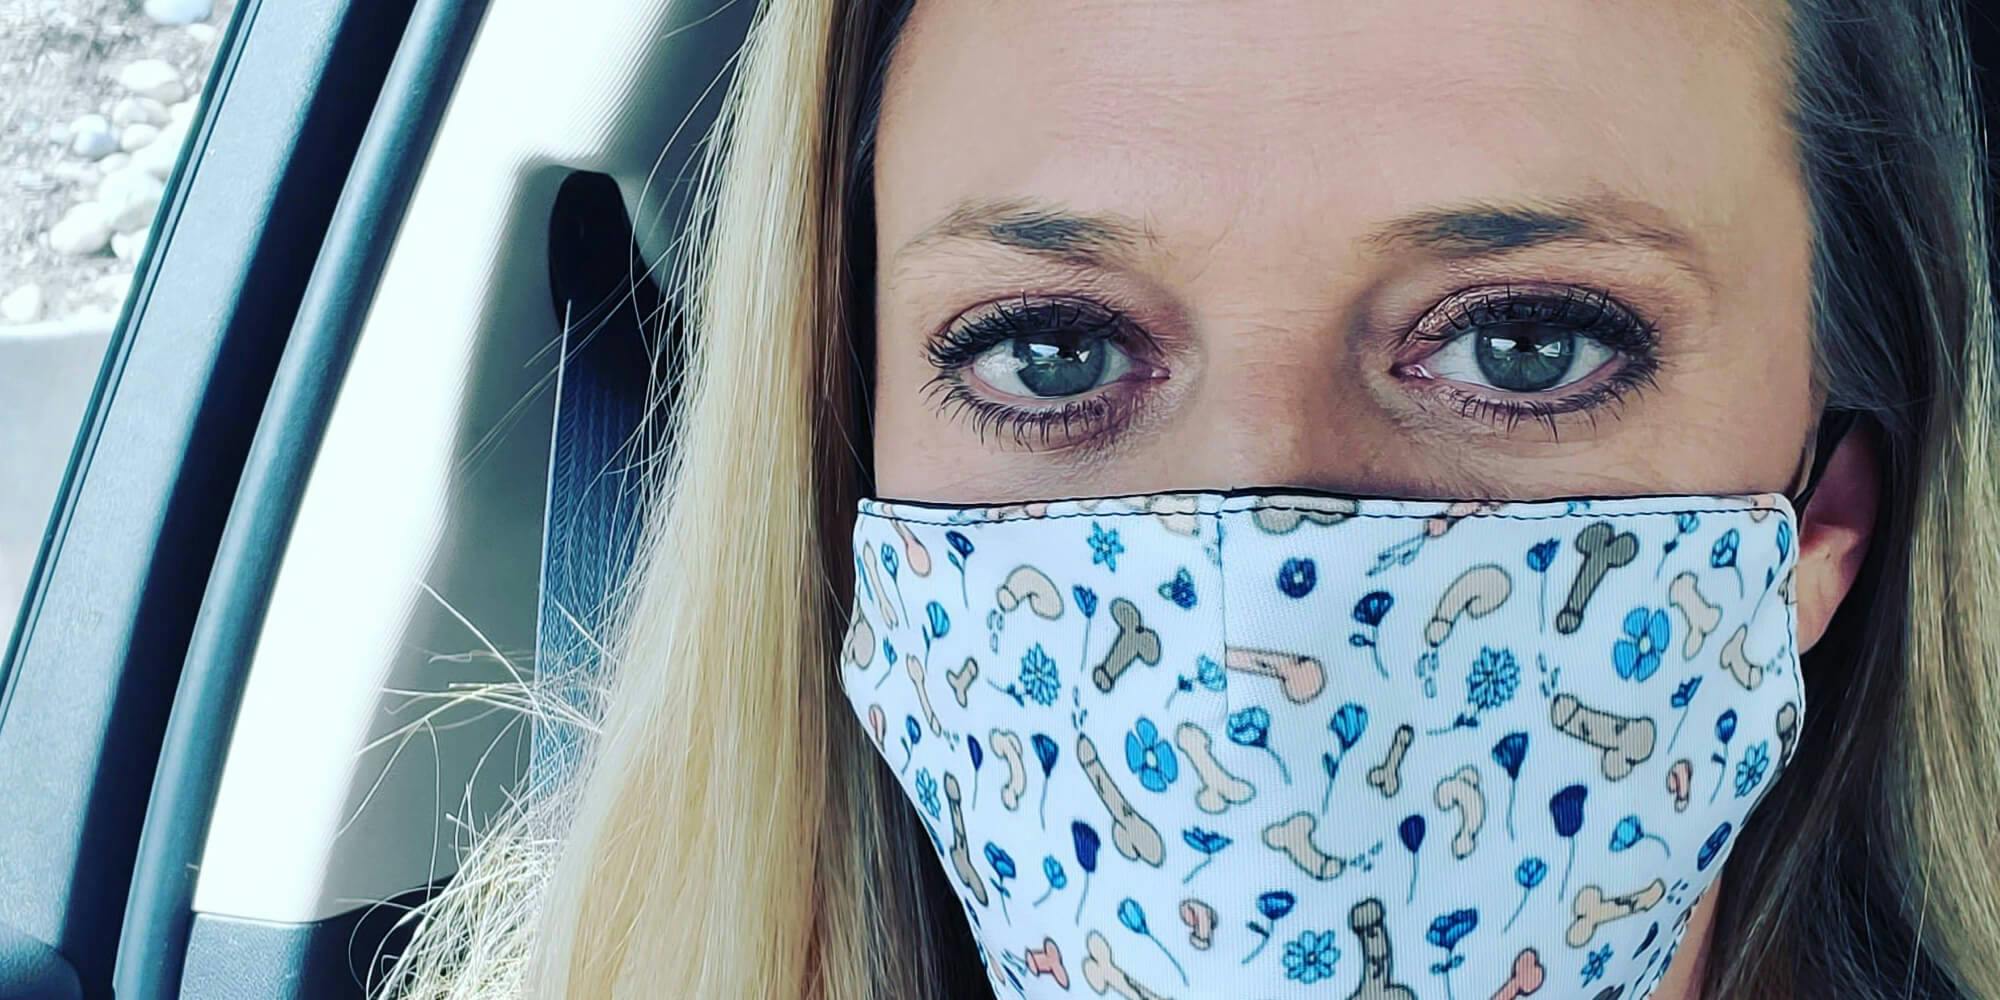 If you can see the NSFW images on this woman’s face mask, you’re probably too close